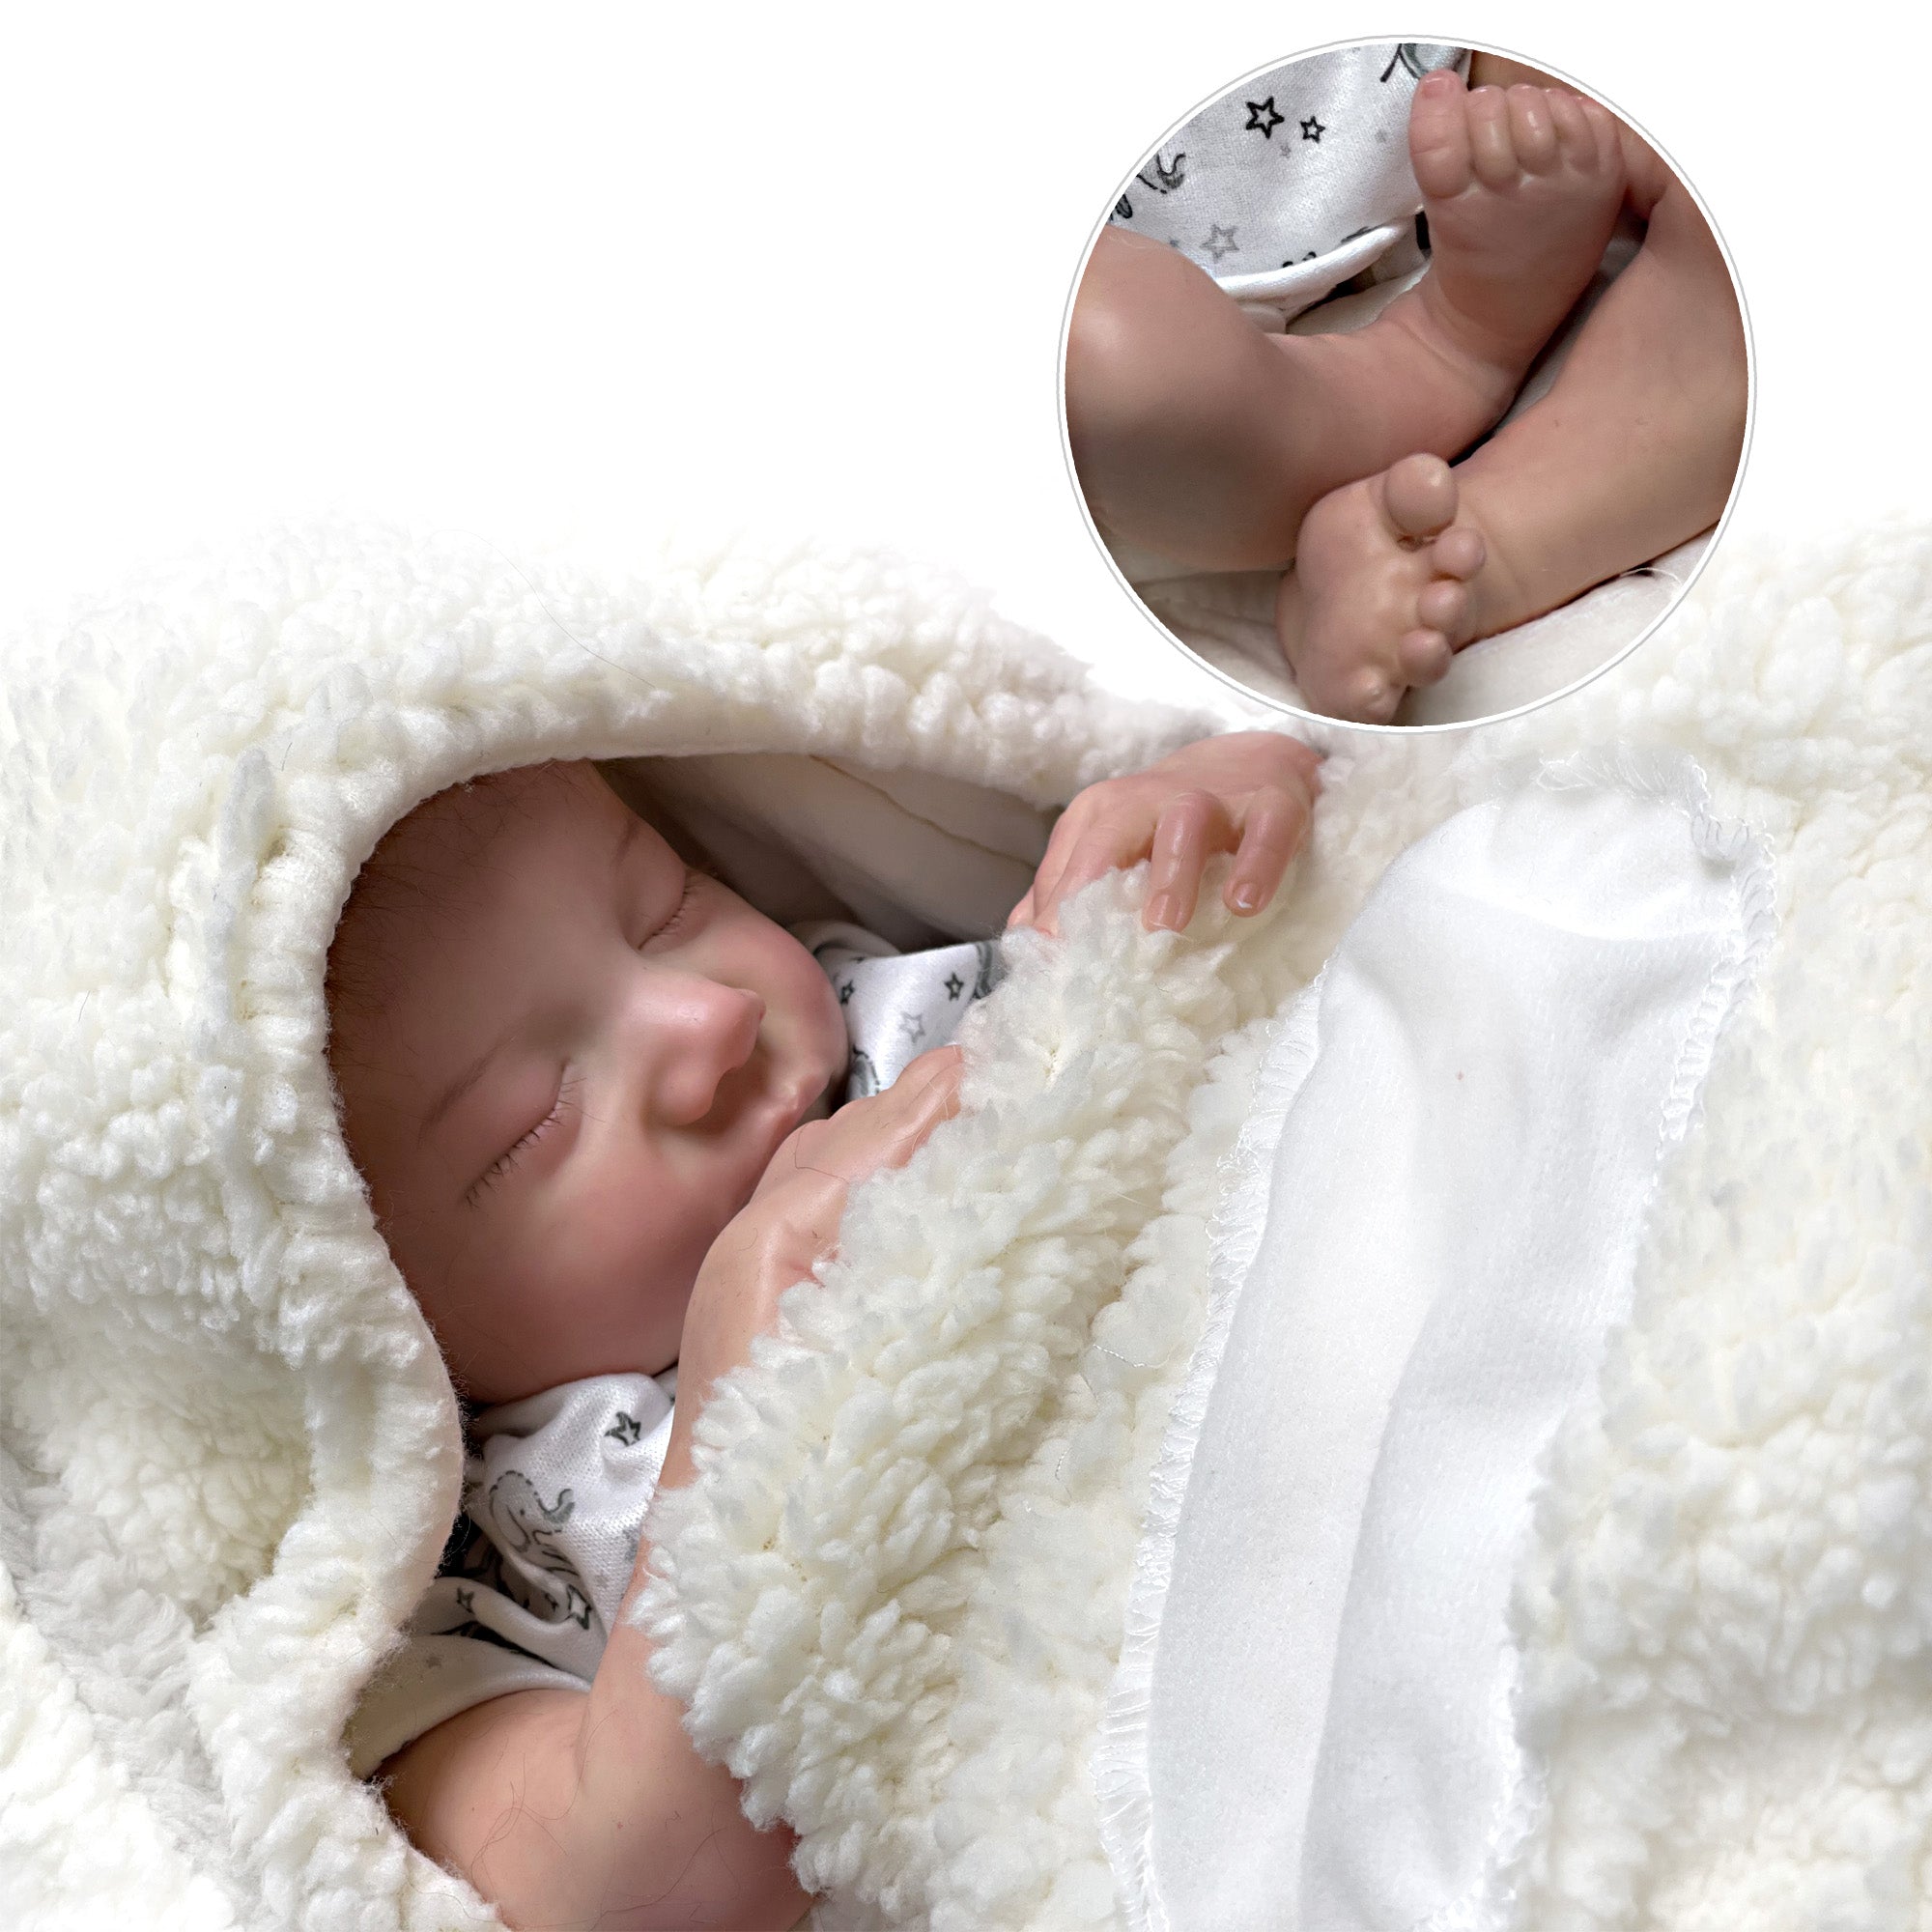 20 Inch Soft Silicone Reborn Dolls Cloth Body Finished Artist Painted Levi Dolls Handmade Lifelike Bebe Newborn For Children's Gifts